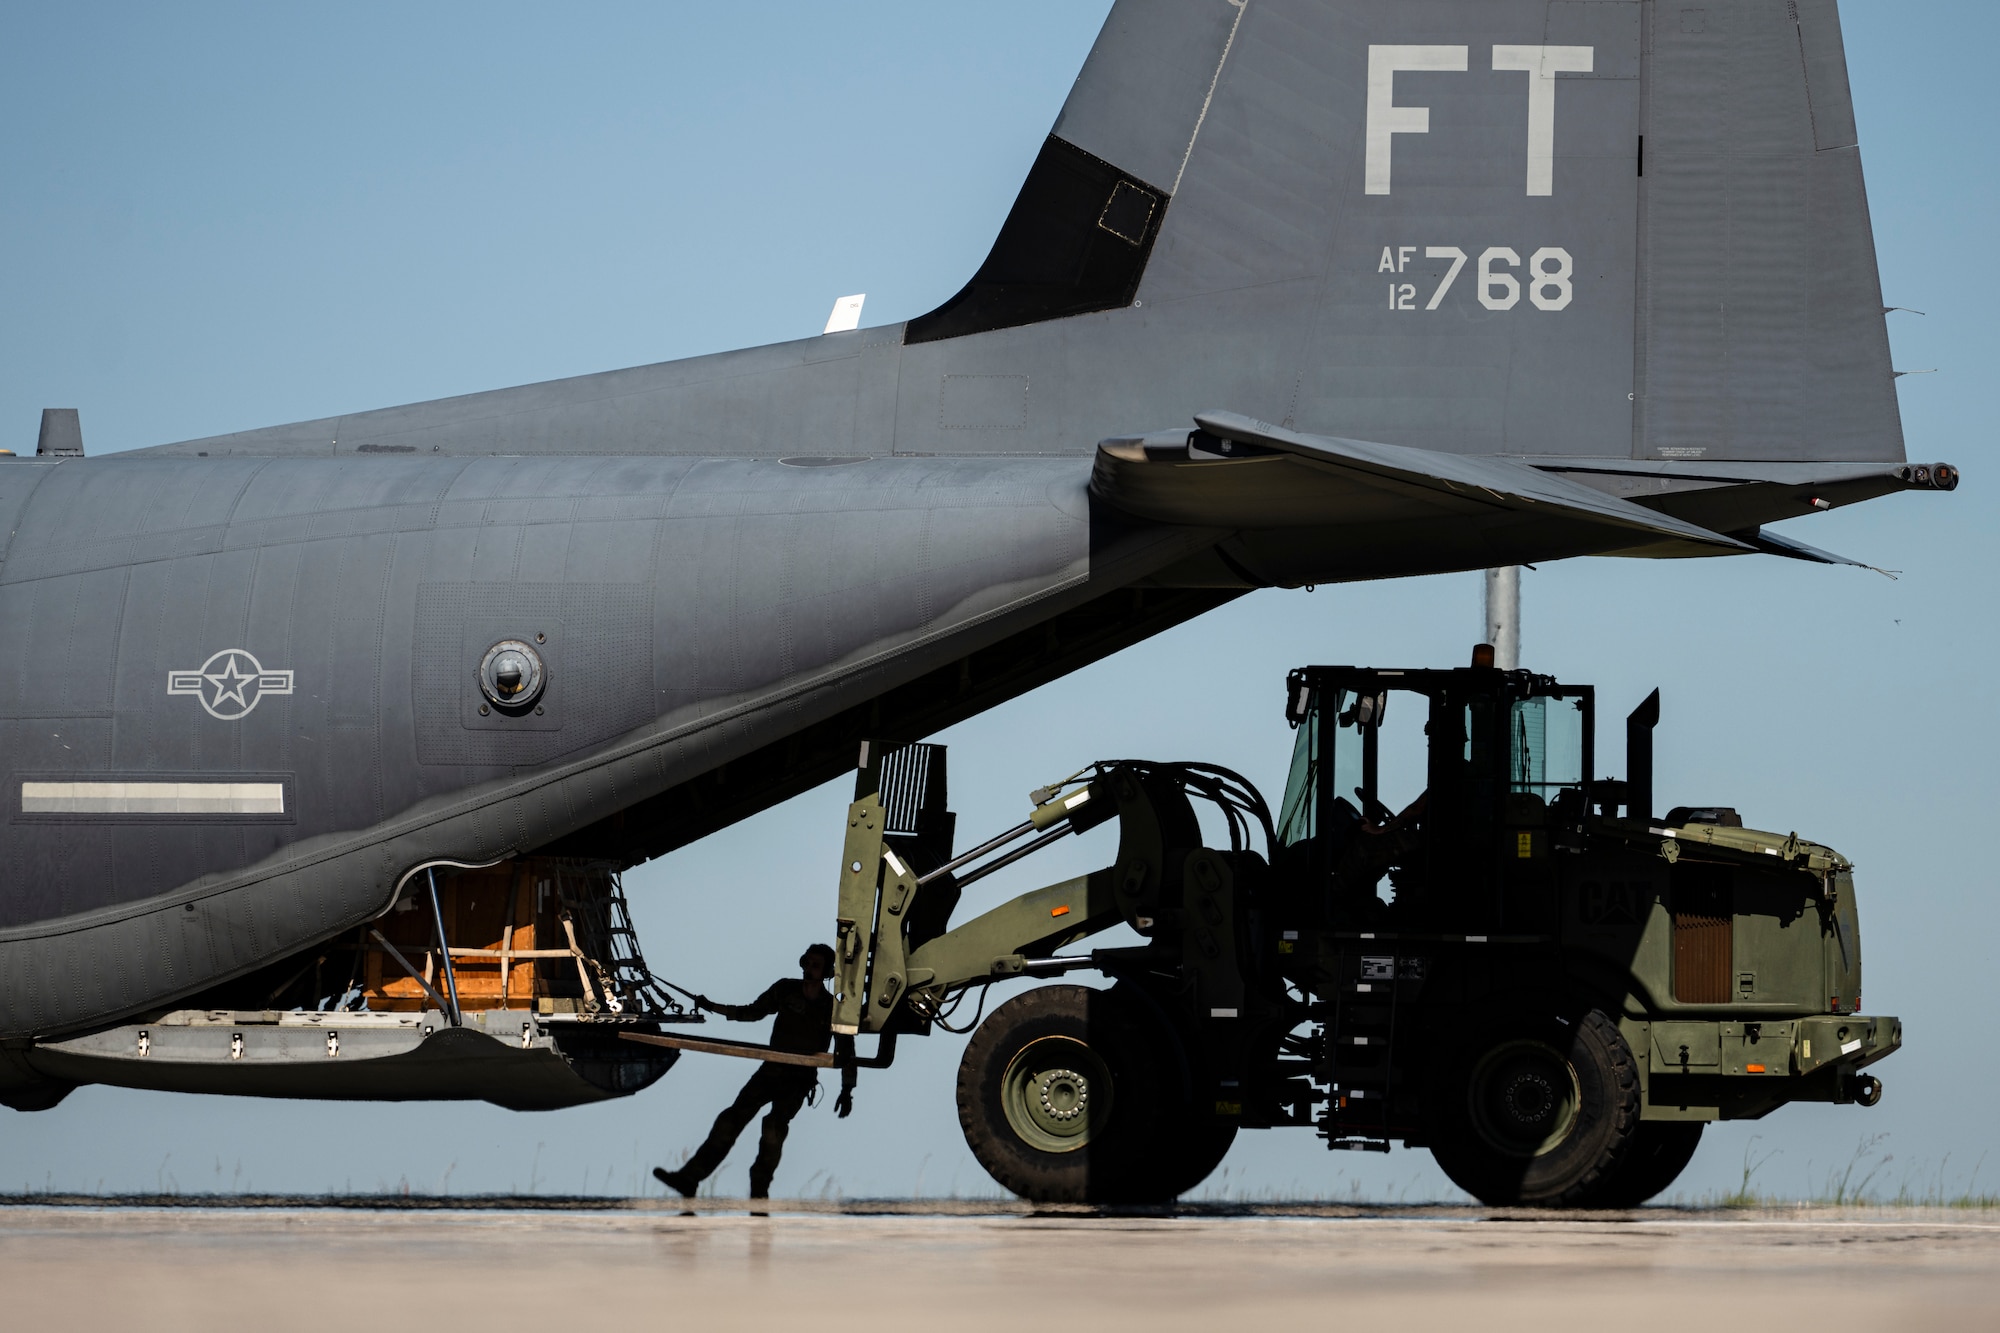 U.S. Air Force Airmen assigned to the 23rd Logistics Readiness Squadron and 71st Rescue Squadron download cargo from an HC-130J Combat King II during Exercise Ready Tiger 24-1 at Avon Park Air Force Range, Florida, April 12, 2024. The 23rd LRS played a crucial role in resupplying the forward operating sites and contingency locations for the exercise. The Ready Tiger 24-1 exercise evaluators will assess the 23rd Wing's proficiency in employing decentralized command and control to fulfill air tasking orders across geographically dispersed areas amid communication challenges. (U.S. Air Force photo by Tech. Sgt. Devin Boyer)